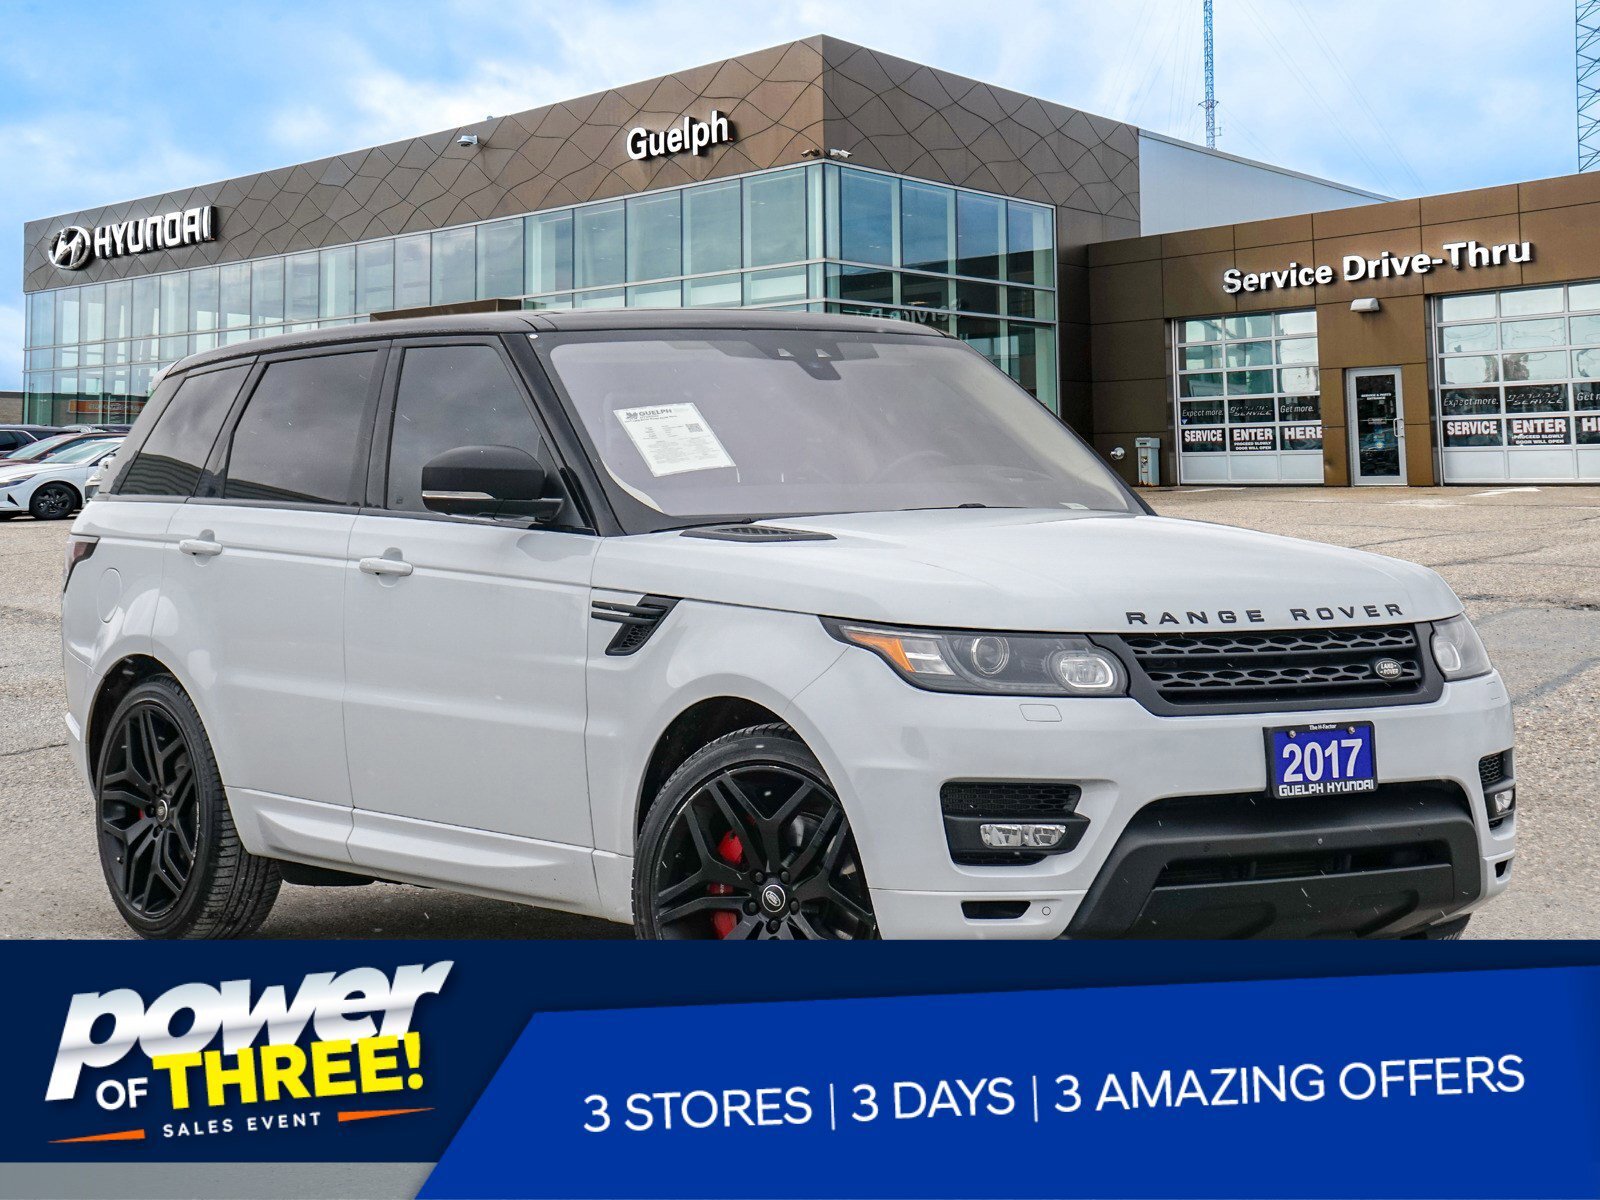 2017 Land Rover Range Rover Sport V8 Supercharged | 510 HP | NEW BRAKES |